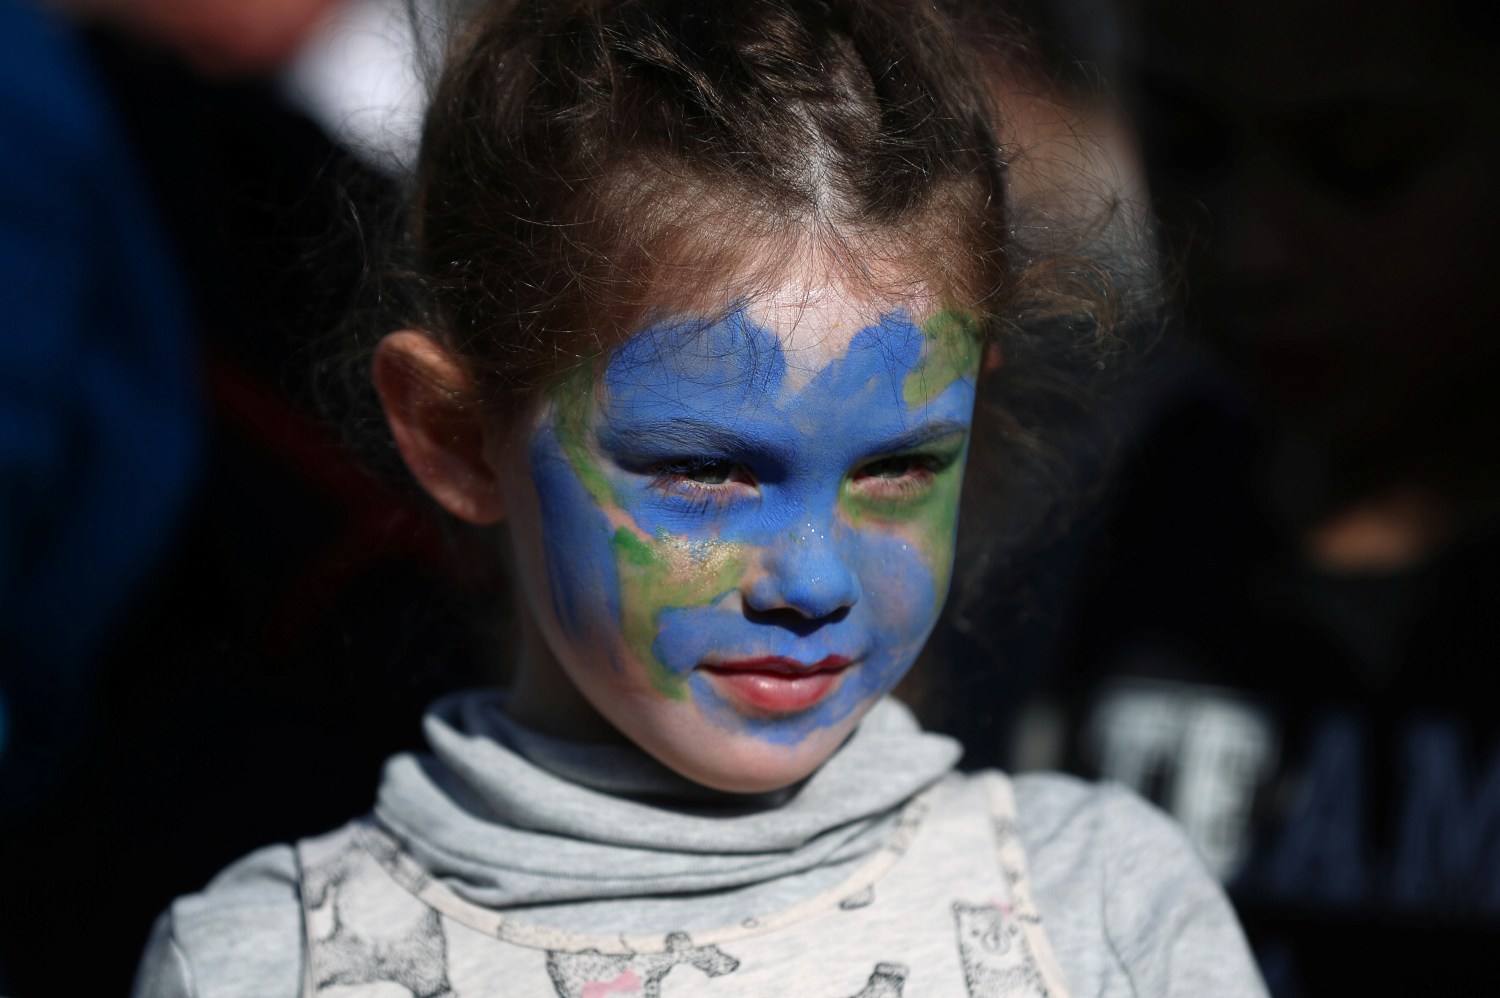 A girl looks on as people take part in a "youth strike for climate change" demonstration in London, Britain February 15, 2019. REUTERS/Simon Dawson - RC1F44A5E6F0